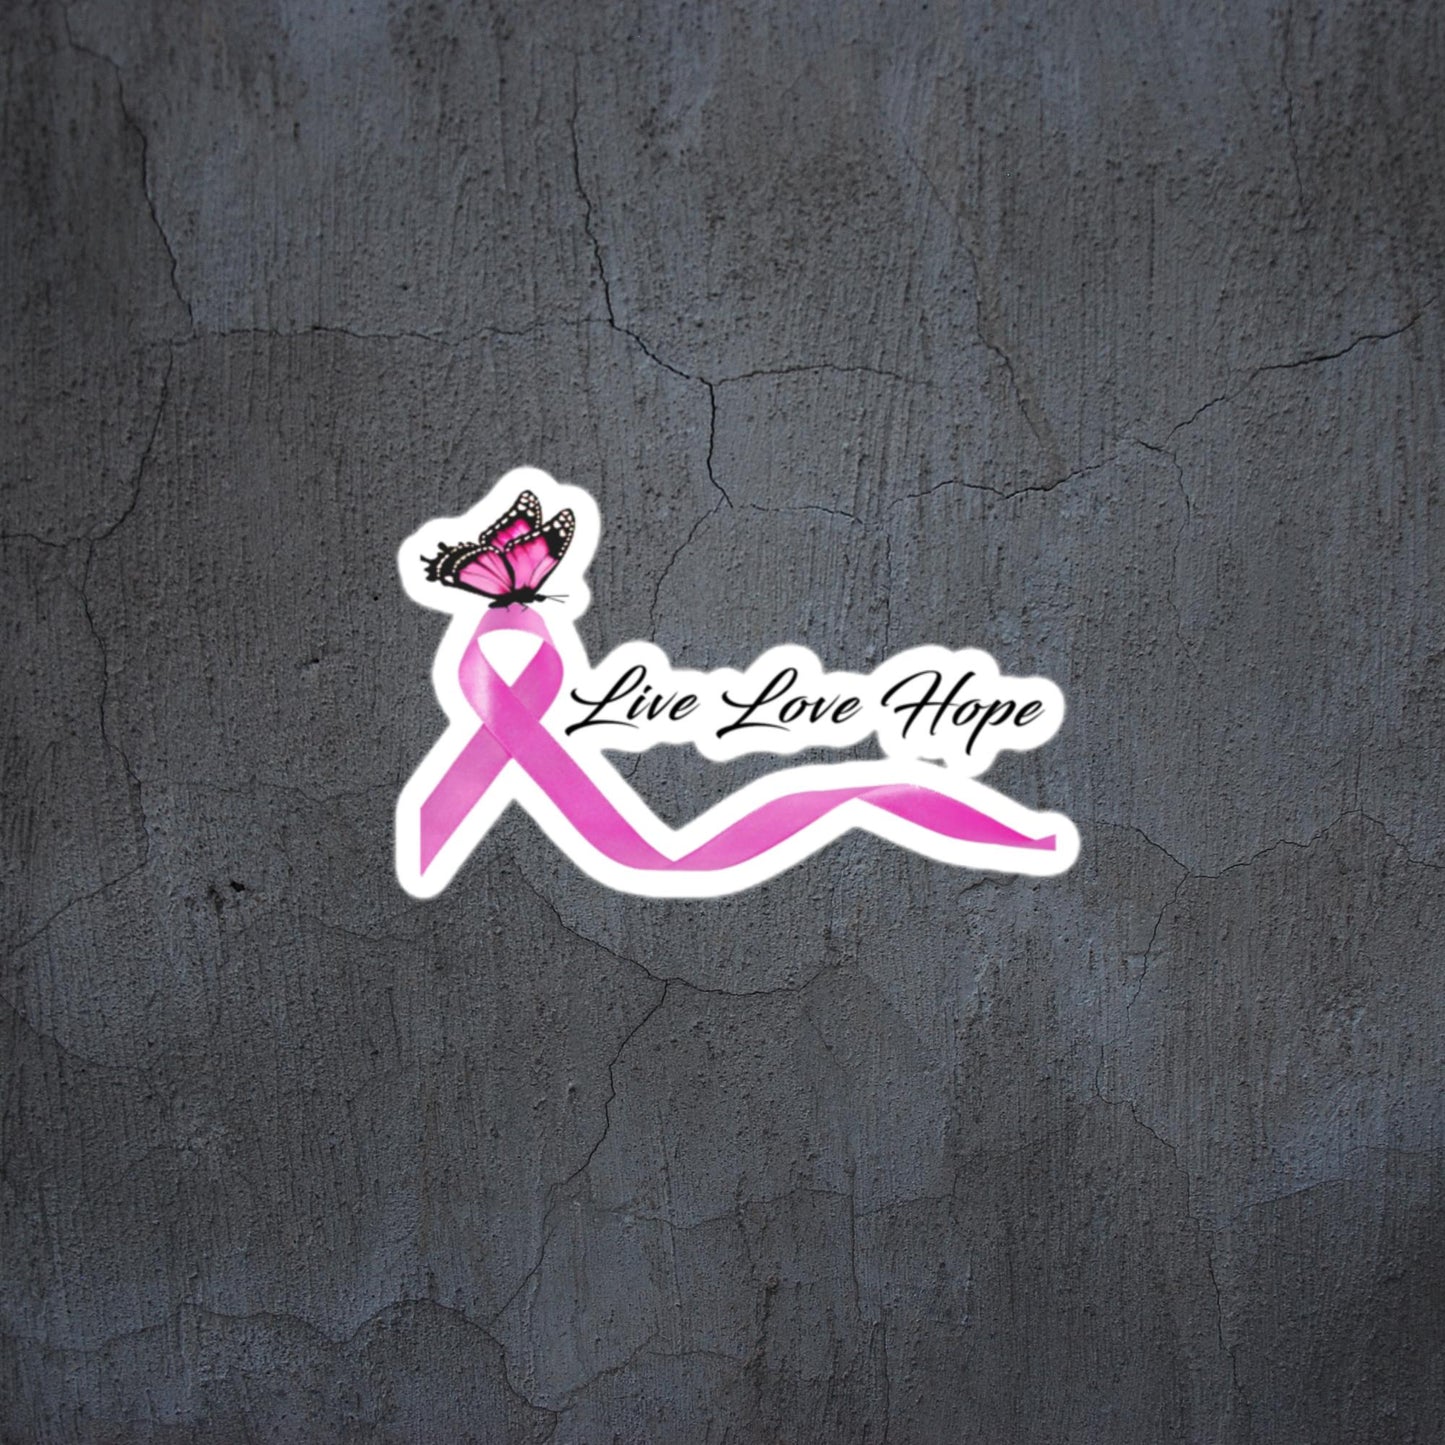 Live love hope Breast Cancer Awareness sticker/decal